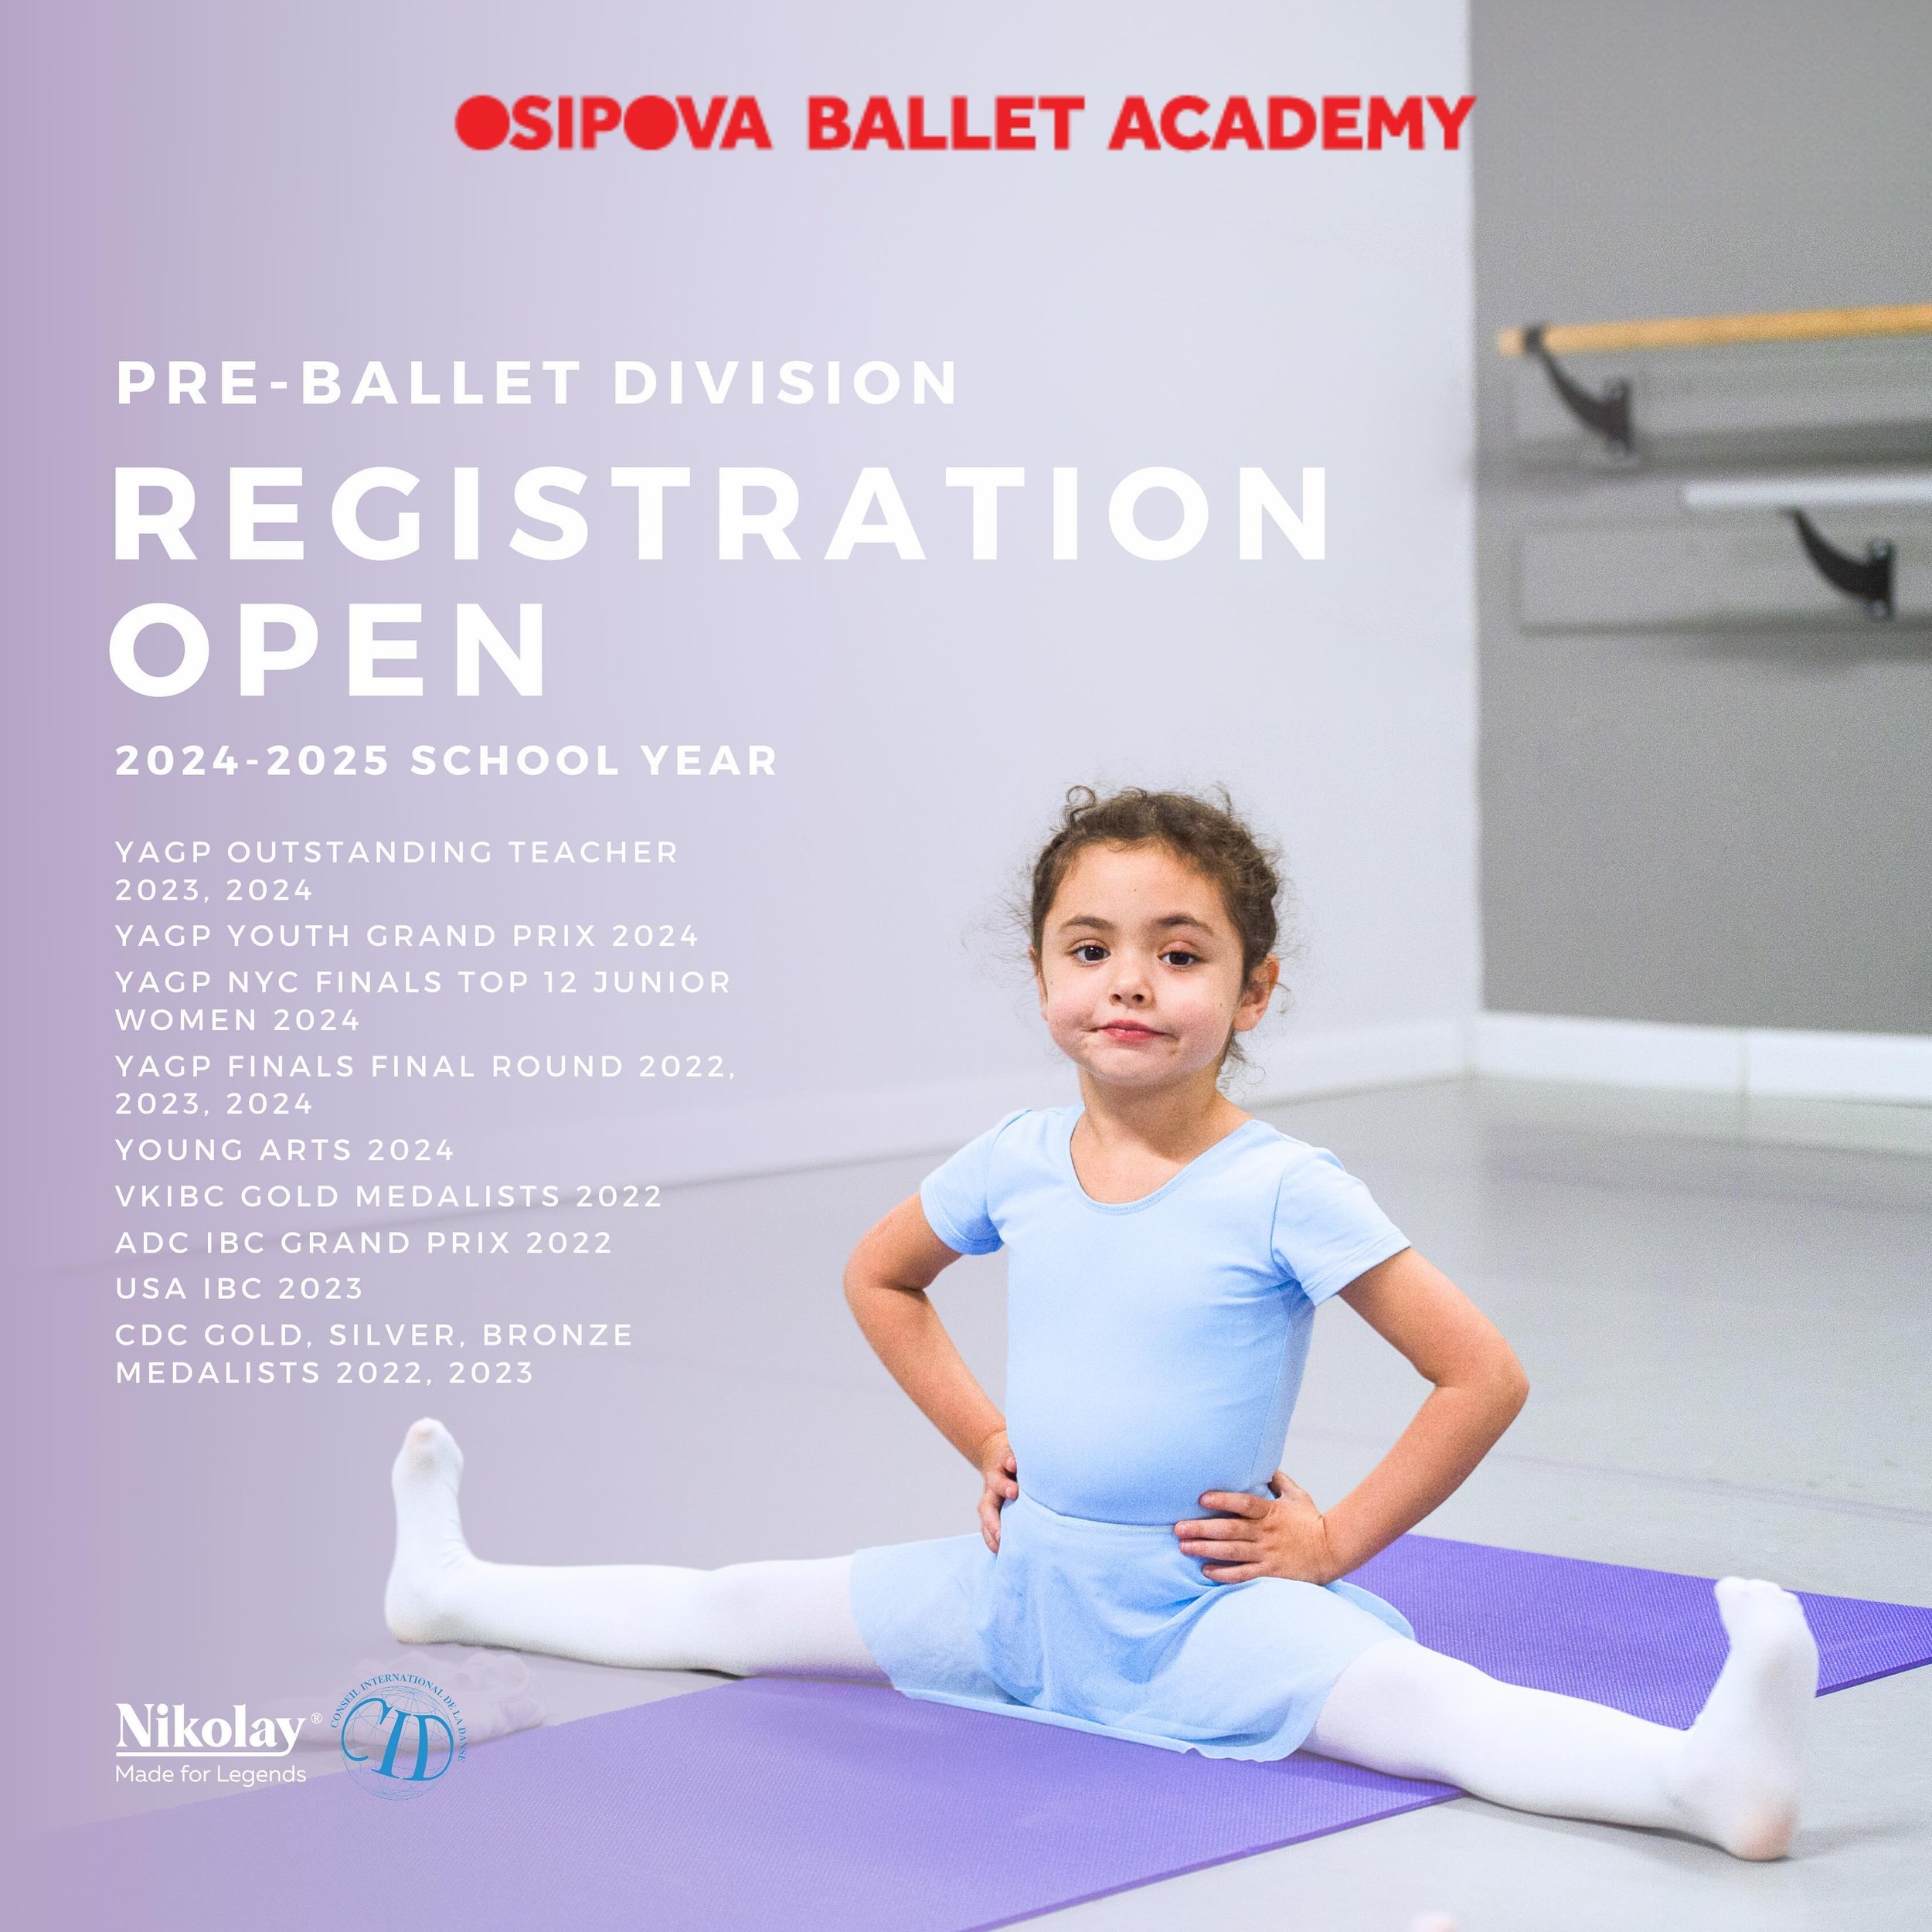 Register today for Osipova Ballet Academy&rsquo;s ✨💜PRE-BALLET DIVISION💜✨

Osipova Ballet Academy is proud to be a part of young dancers journeys by guiding them through their introduction to ballet. By inspiring young minds, Osipova Ballet Academy